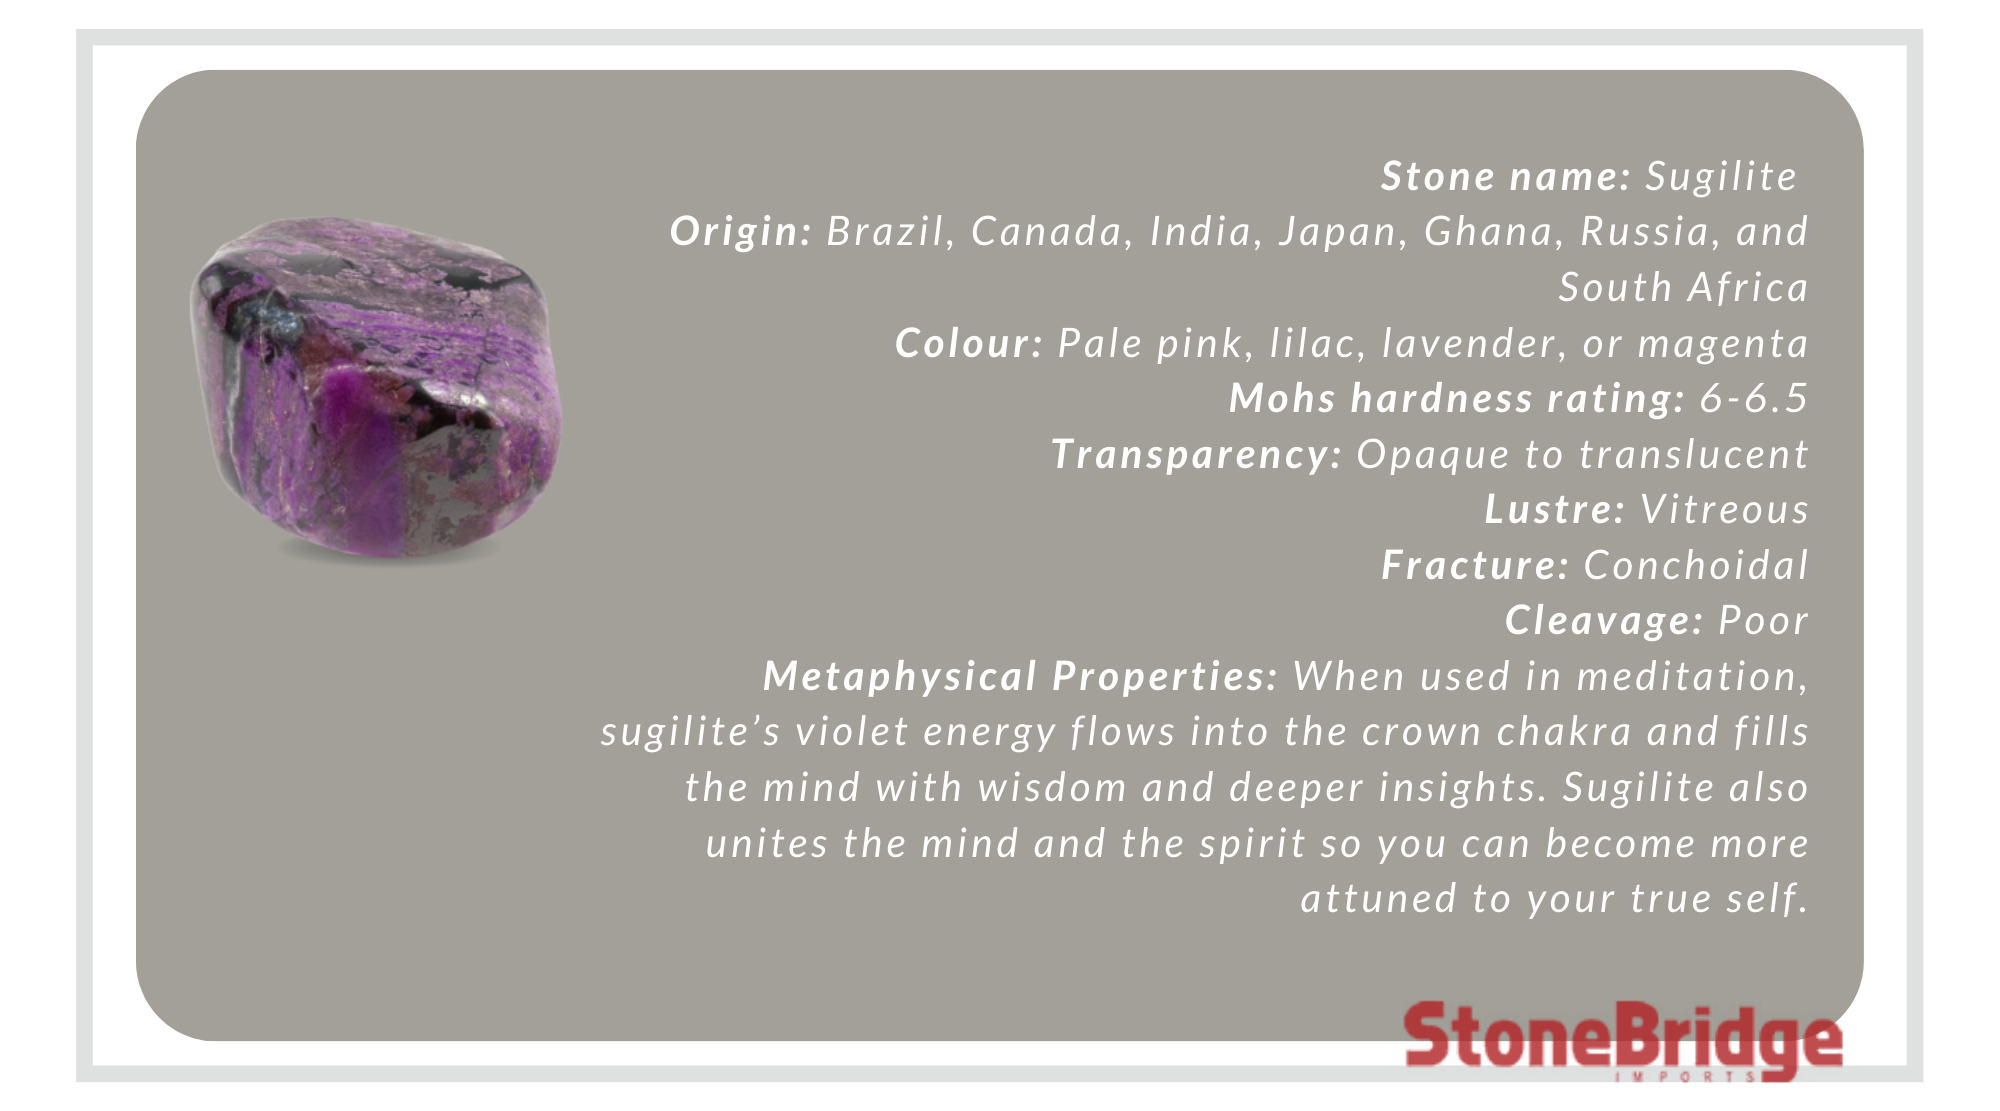 what are the benefits of sugilite